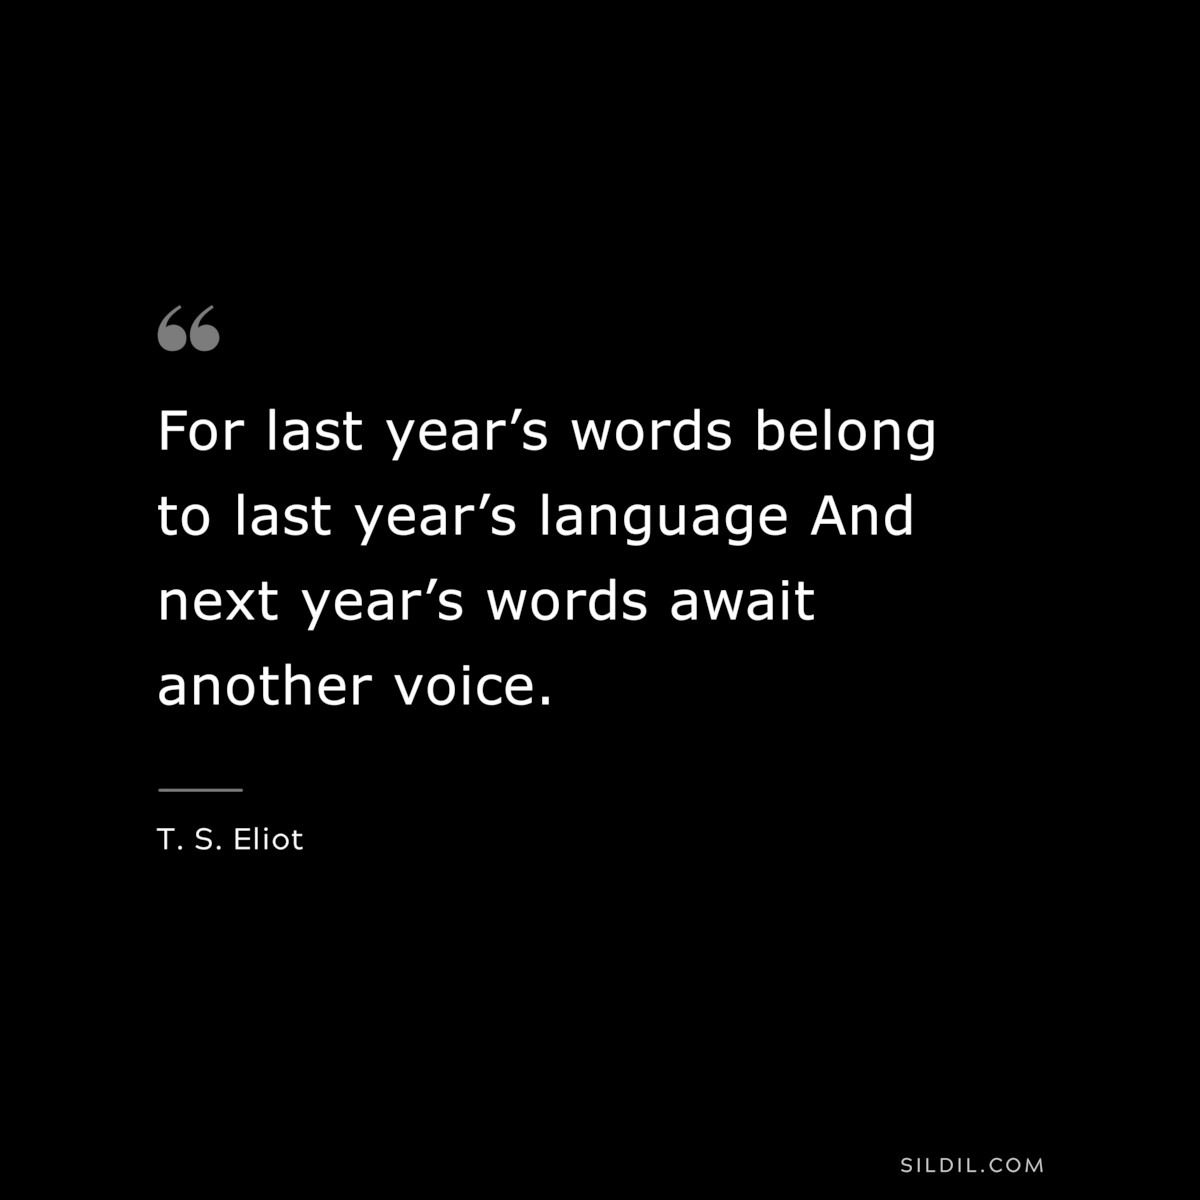 For last year’s words belong to last year’s language And next year’s words await another voice. ― T. S. Eliot